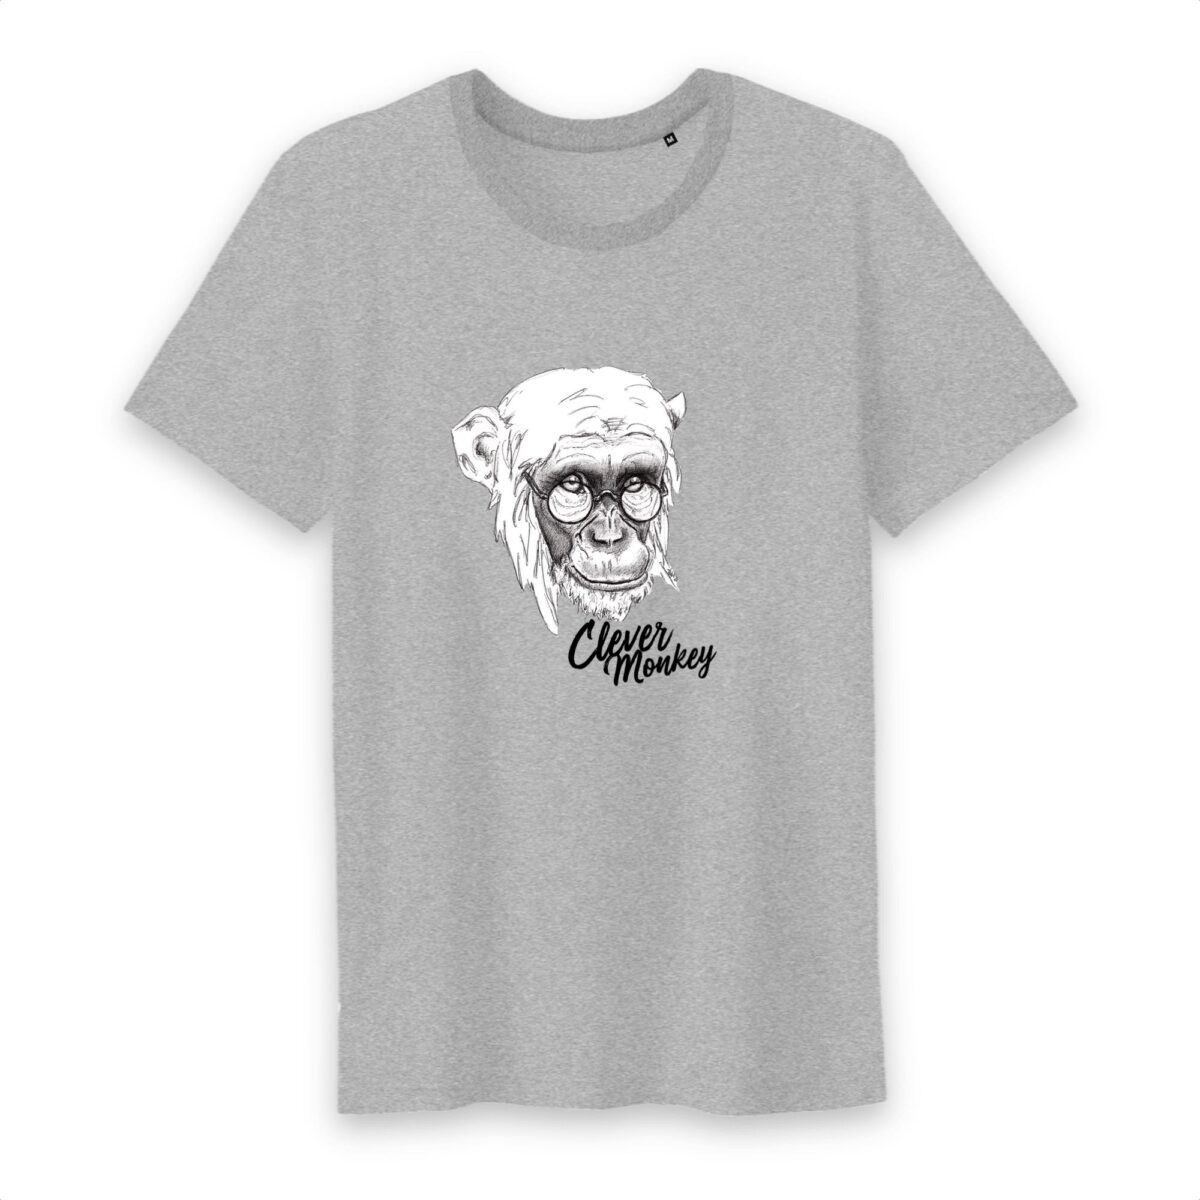 Clever Monkey Tee